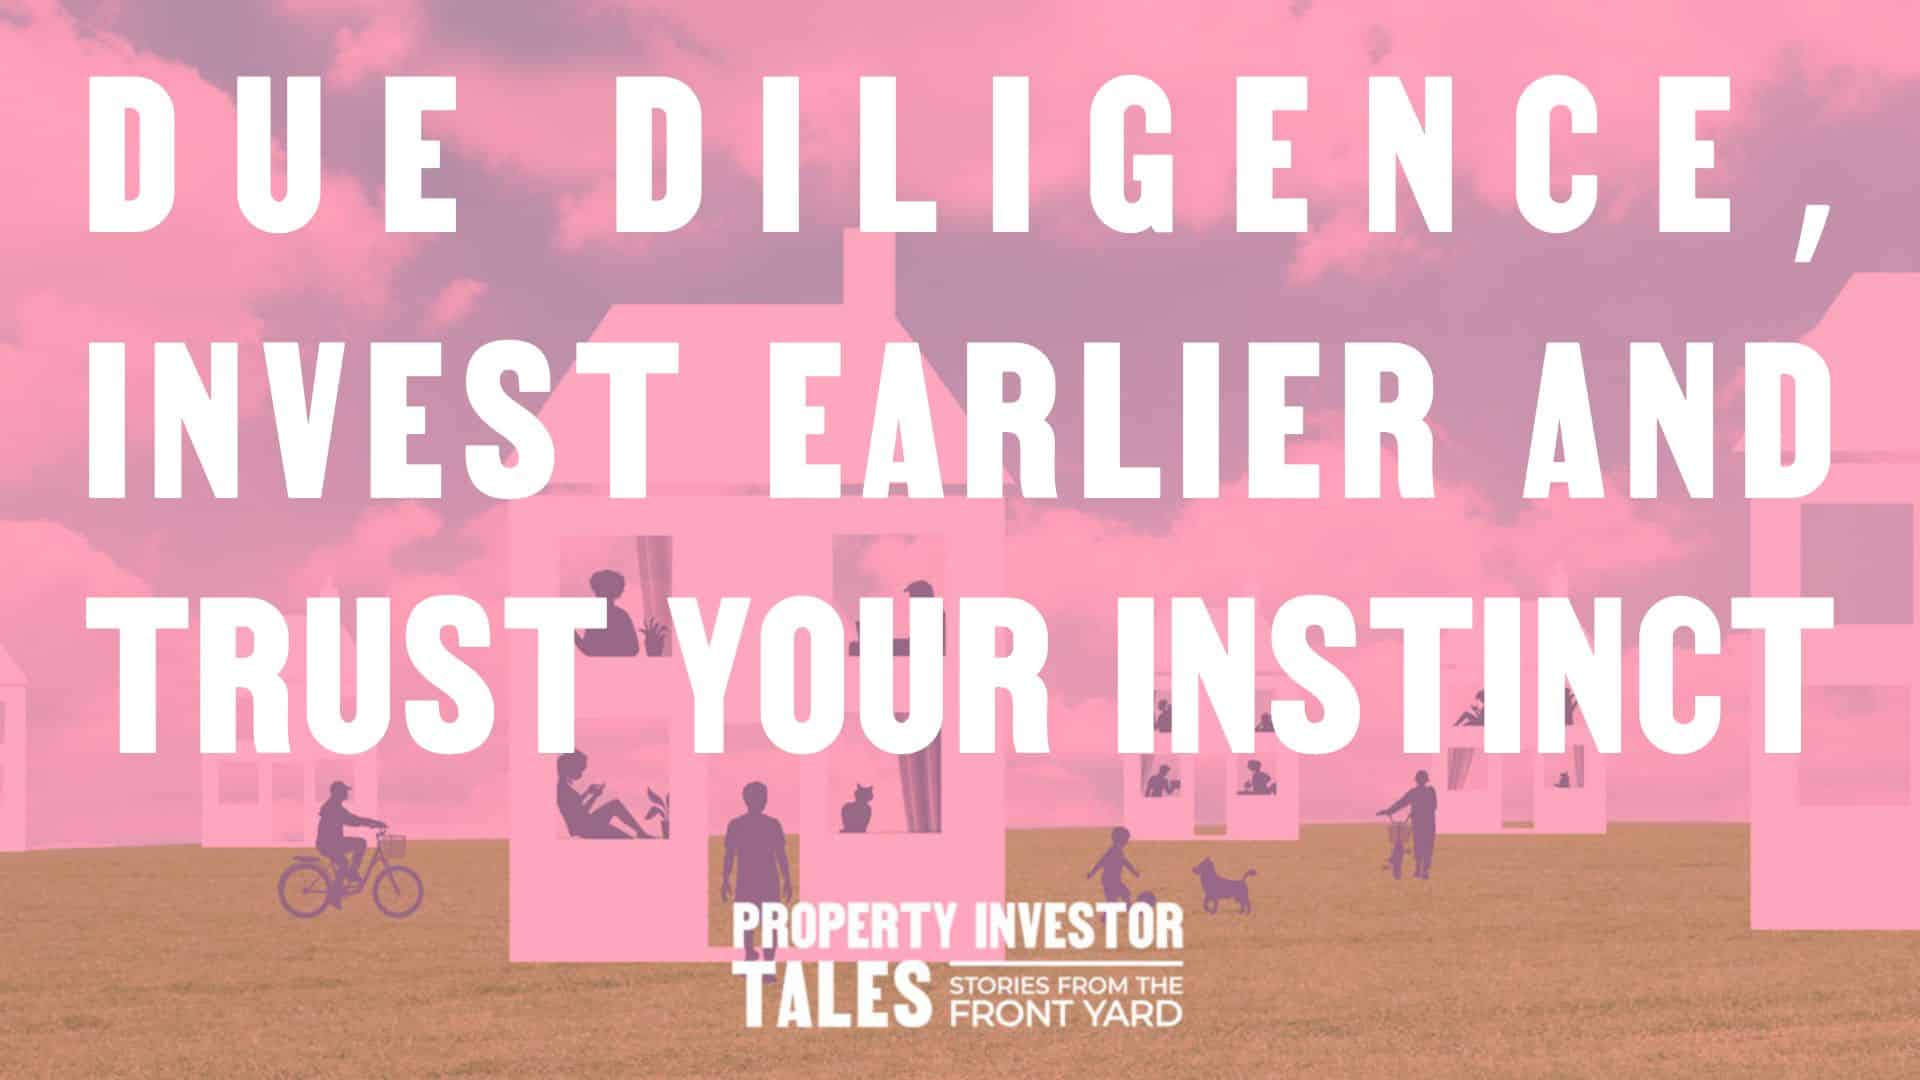 Due Diligence, Invest Earlier, and Trust Your Instinct